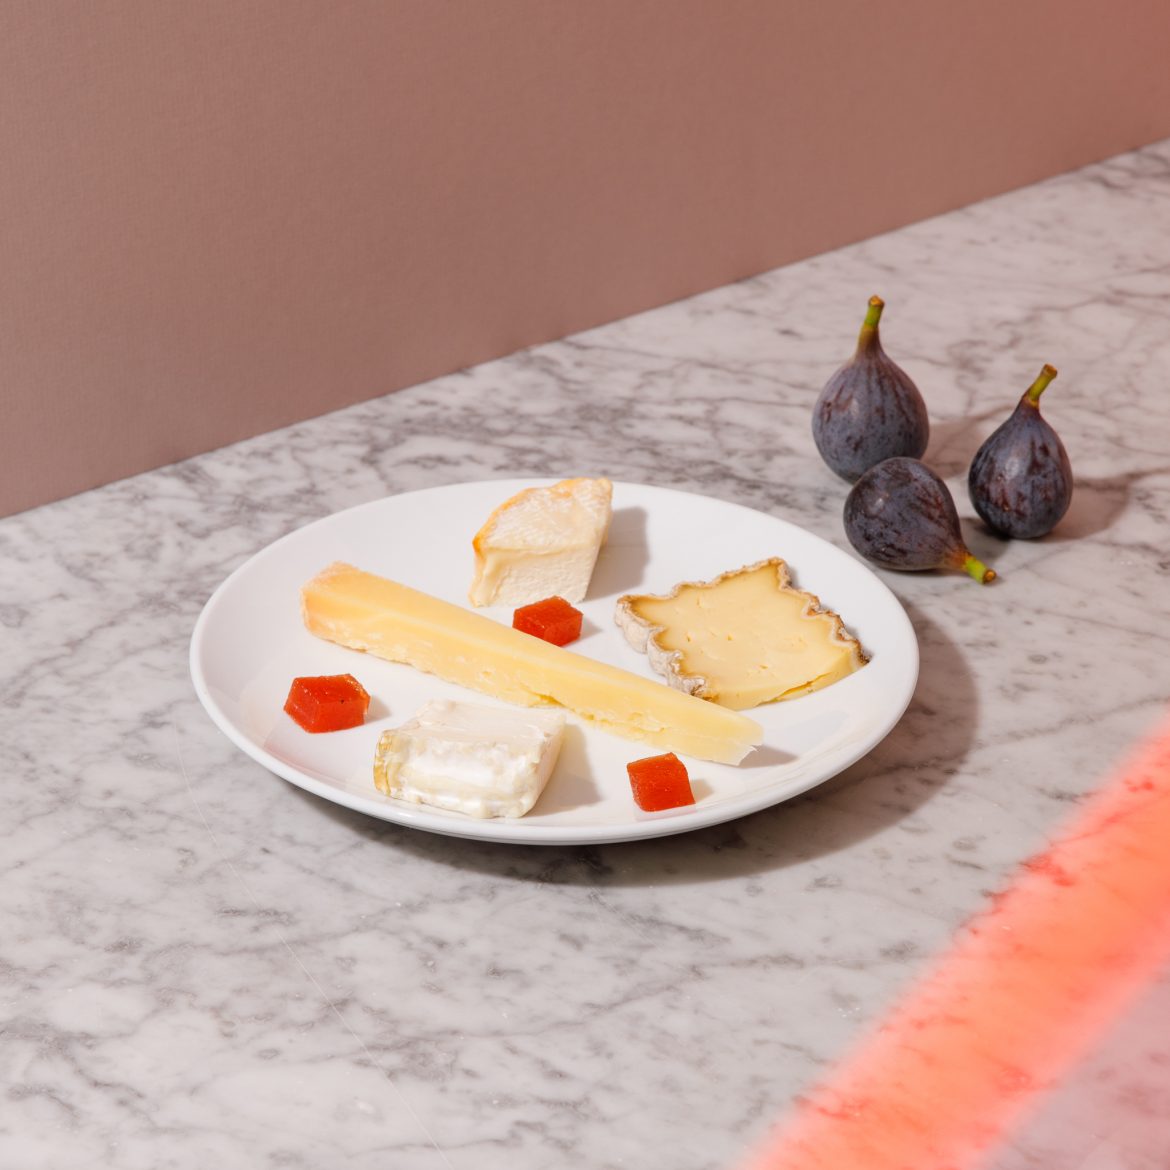 a plate of small pieces of cheese, abstract placement with 3 figs off plate in background. Background is marble table